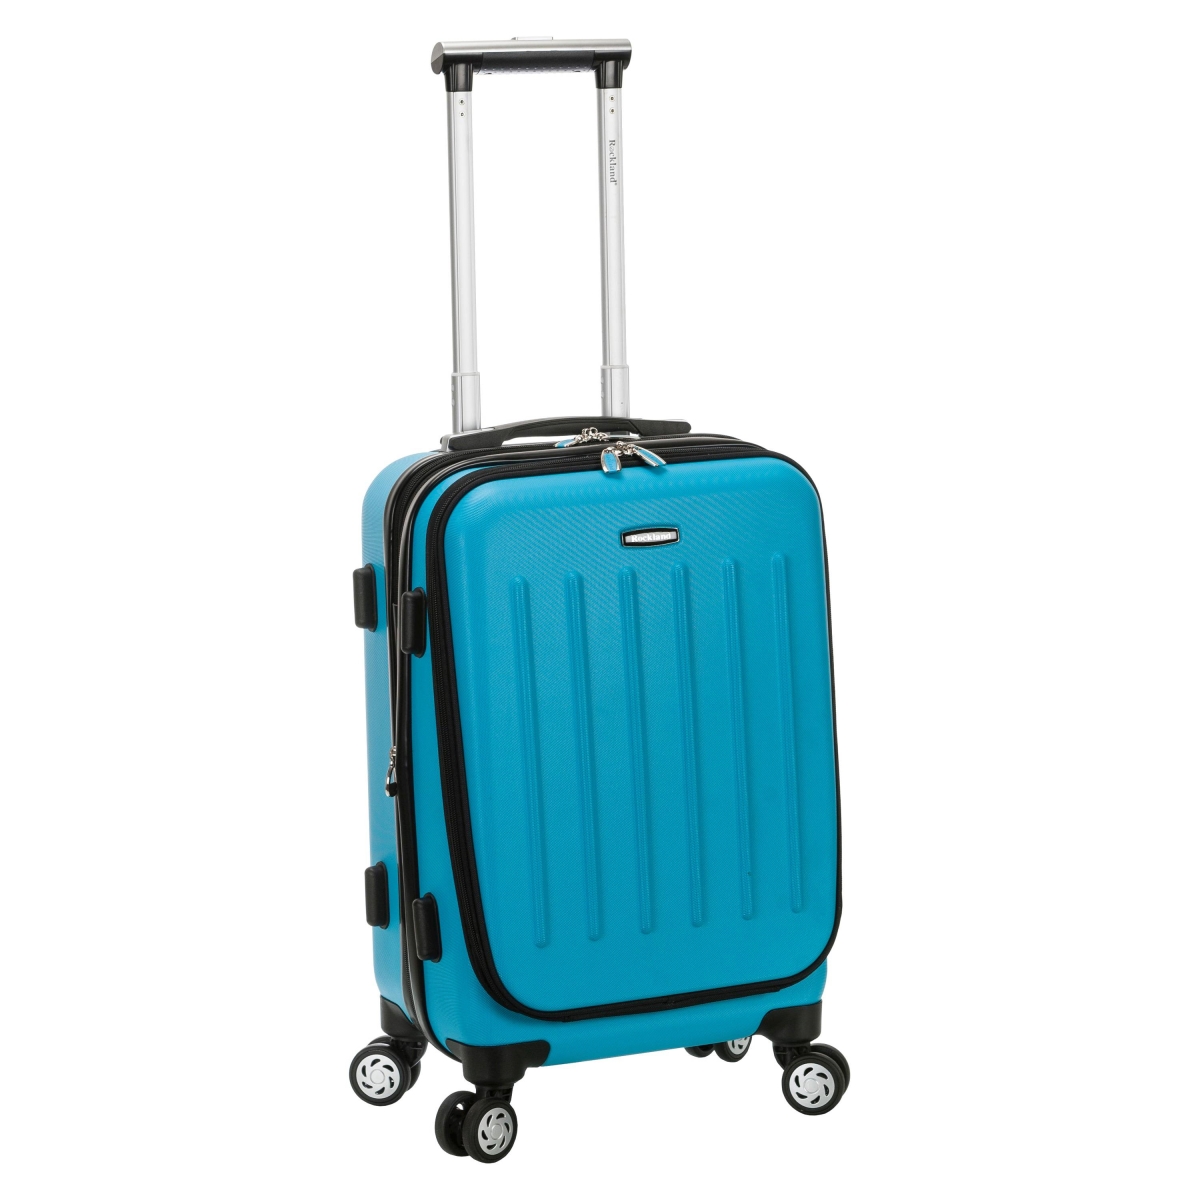 F2401-turquoise 19 In. Titan Hard Luggage Abs Spinner Laptop Carry On - Turquoise